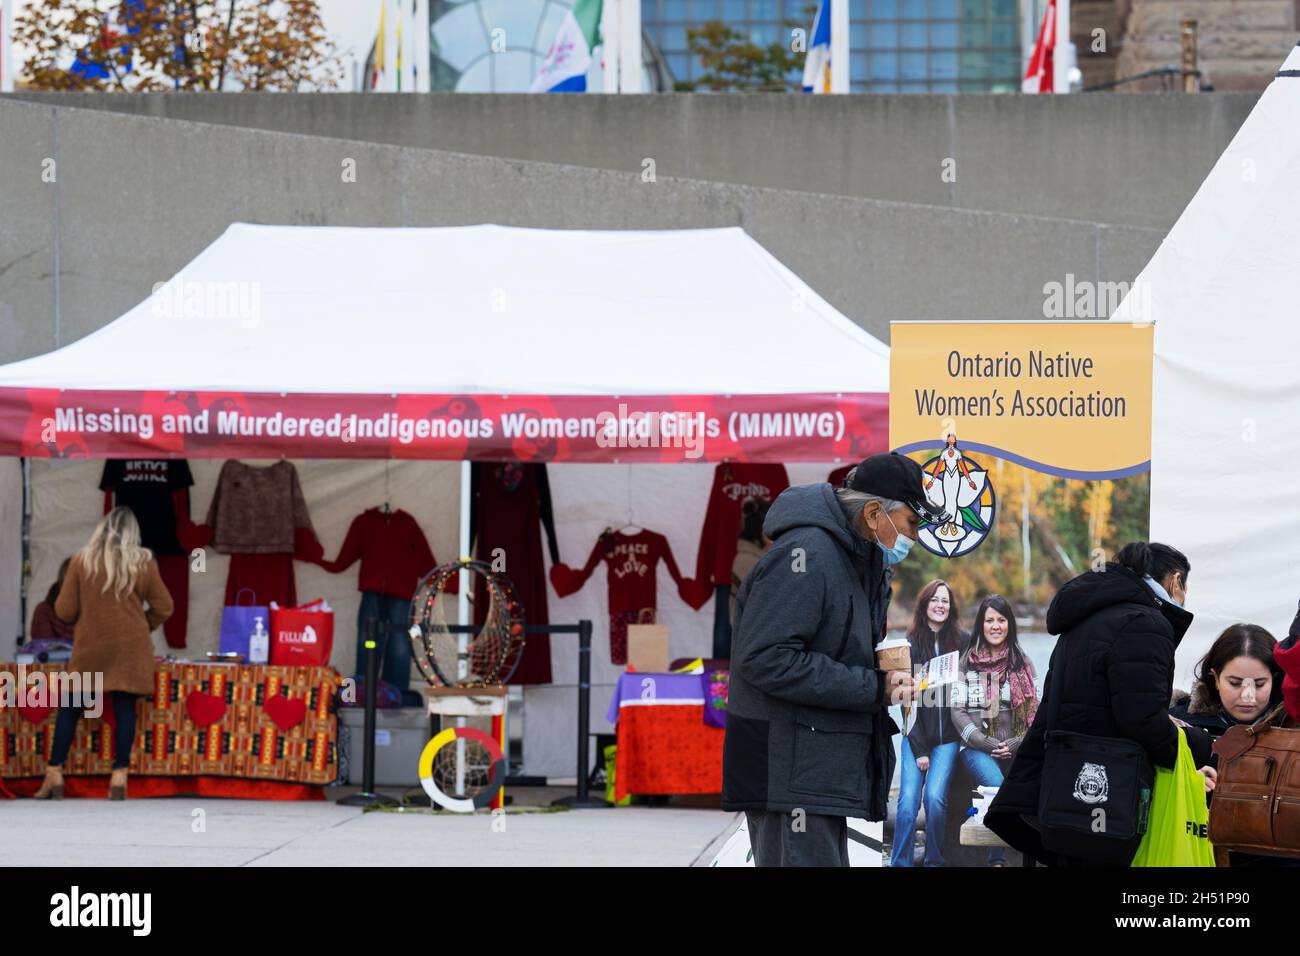 Missing and Murdered Indigenous Women and Girls (MMIWG) Booth and Ontario Womne's Association at the  Indigenous Legacy Gathering,  in Toronto, Canada Stock Photo